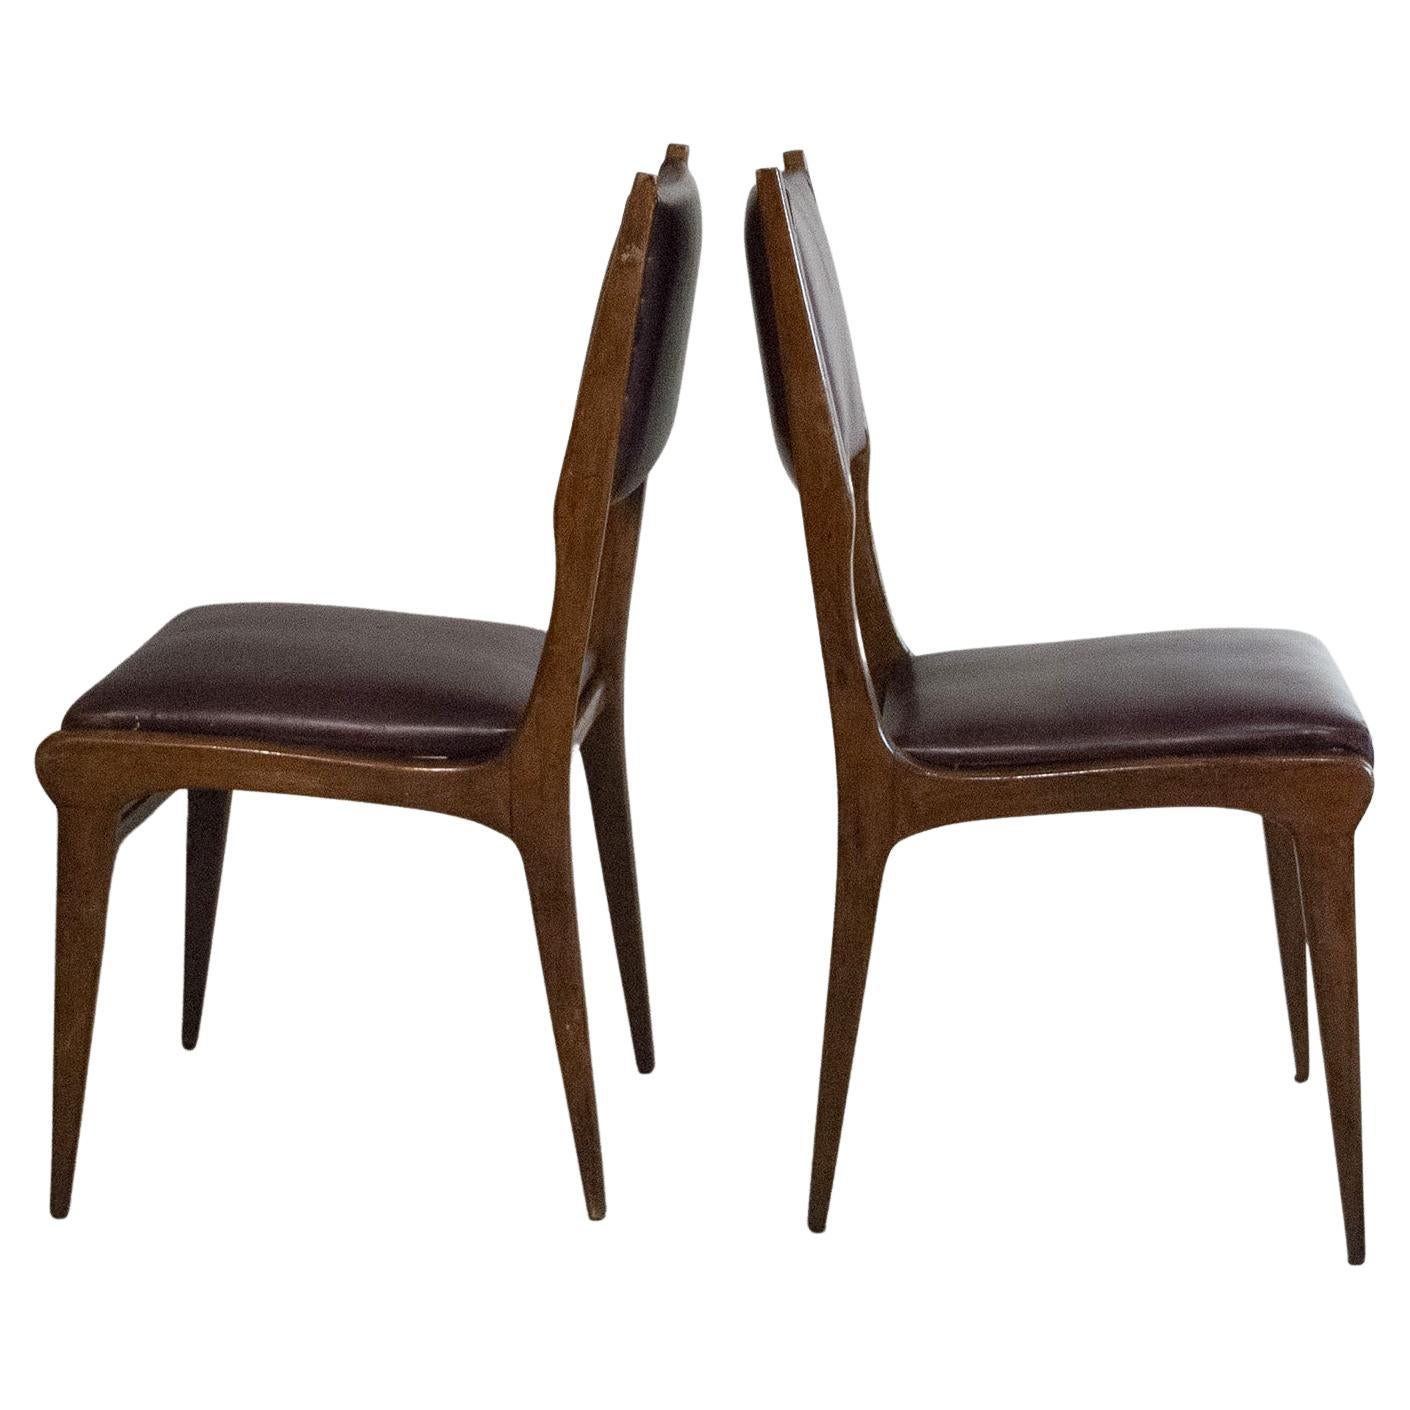 Carlo de Carli in the Style Italian Midcentury Chairs For Sale